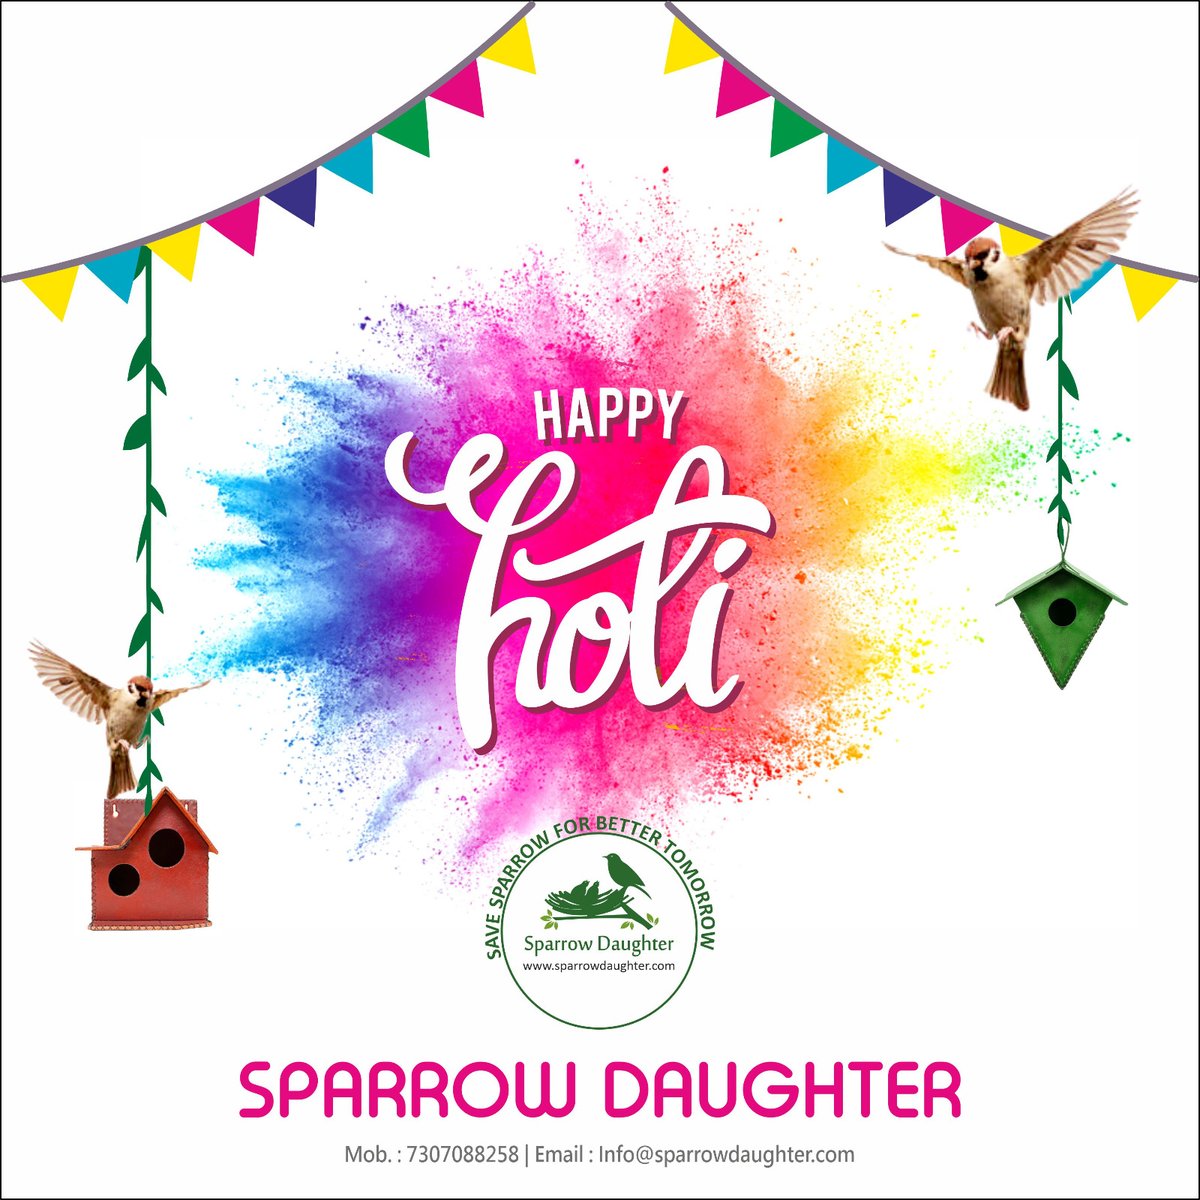 'Happy Holi to all our customers and partners! May this festival of colors bring a new energy and enthusiasm to your lives.  #HappyHoli #FestivalOfColors #SpreadJoyAndHappiness #CelebrationTime'